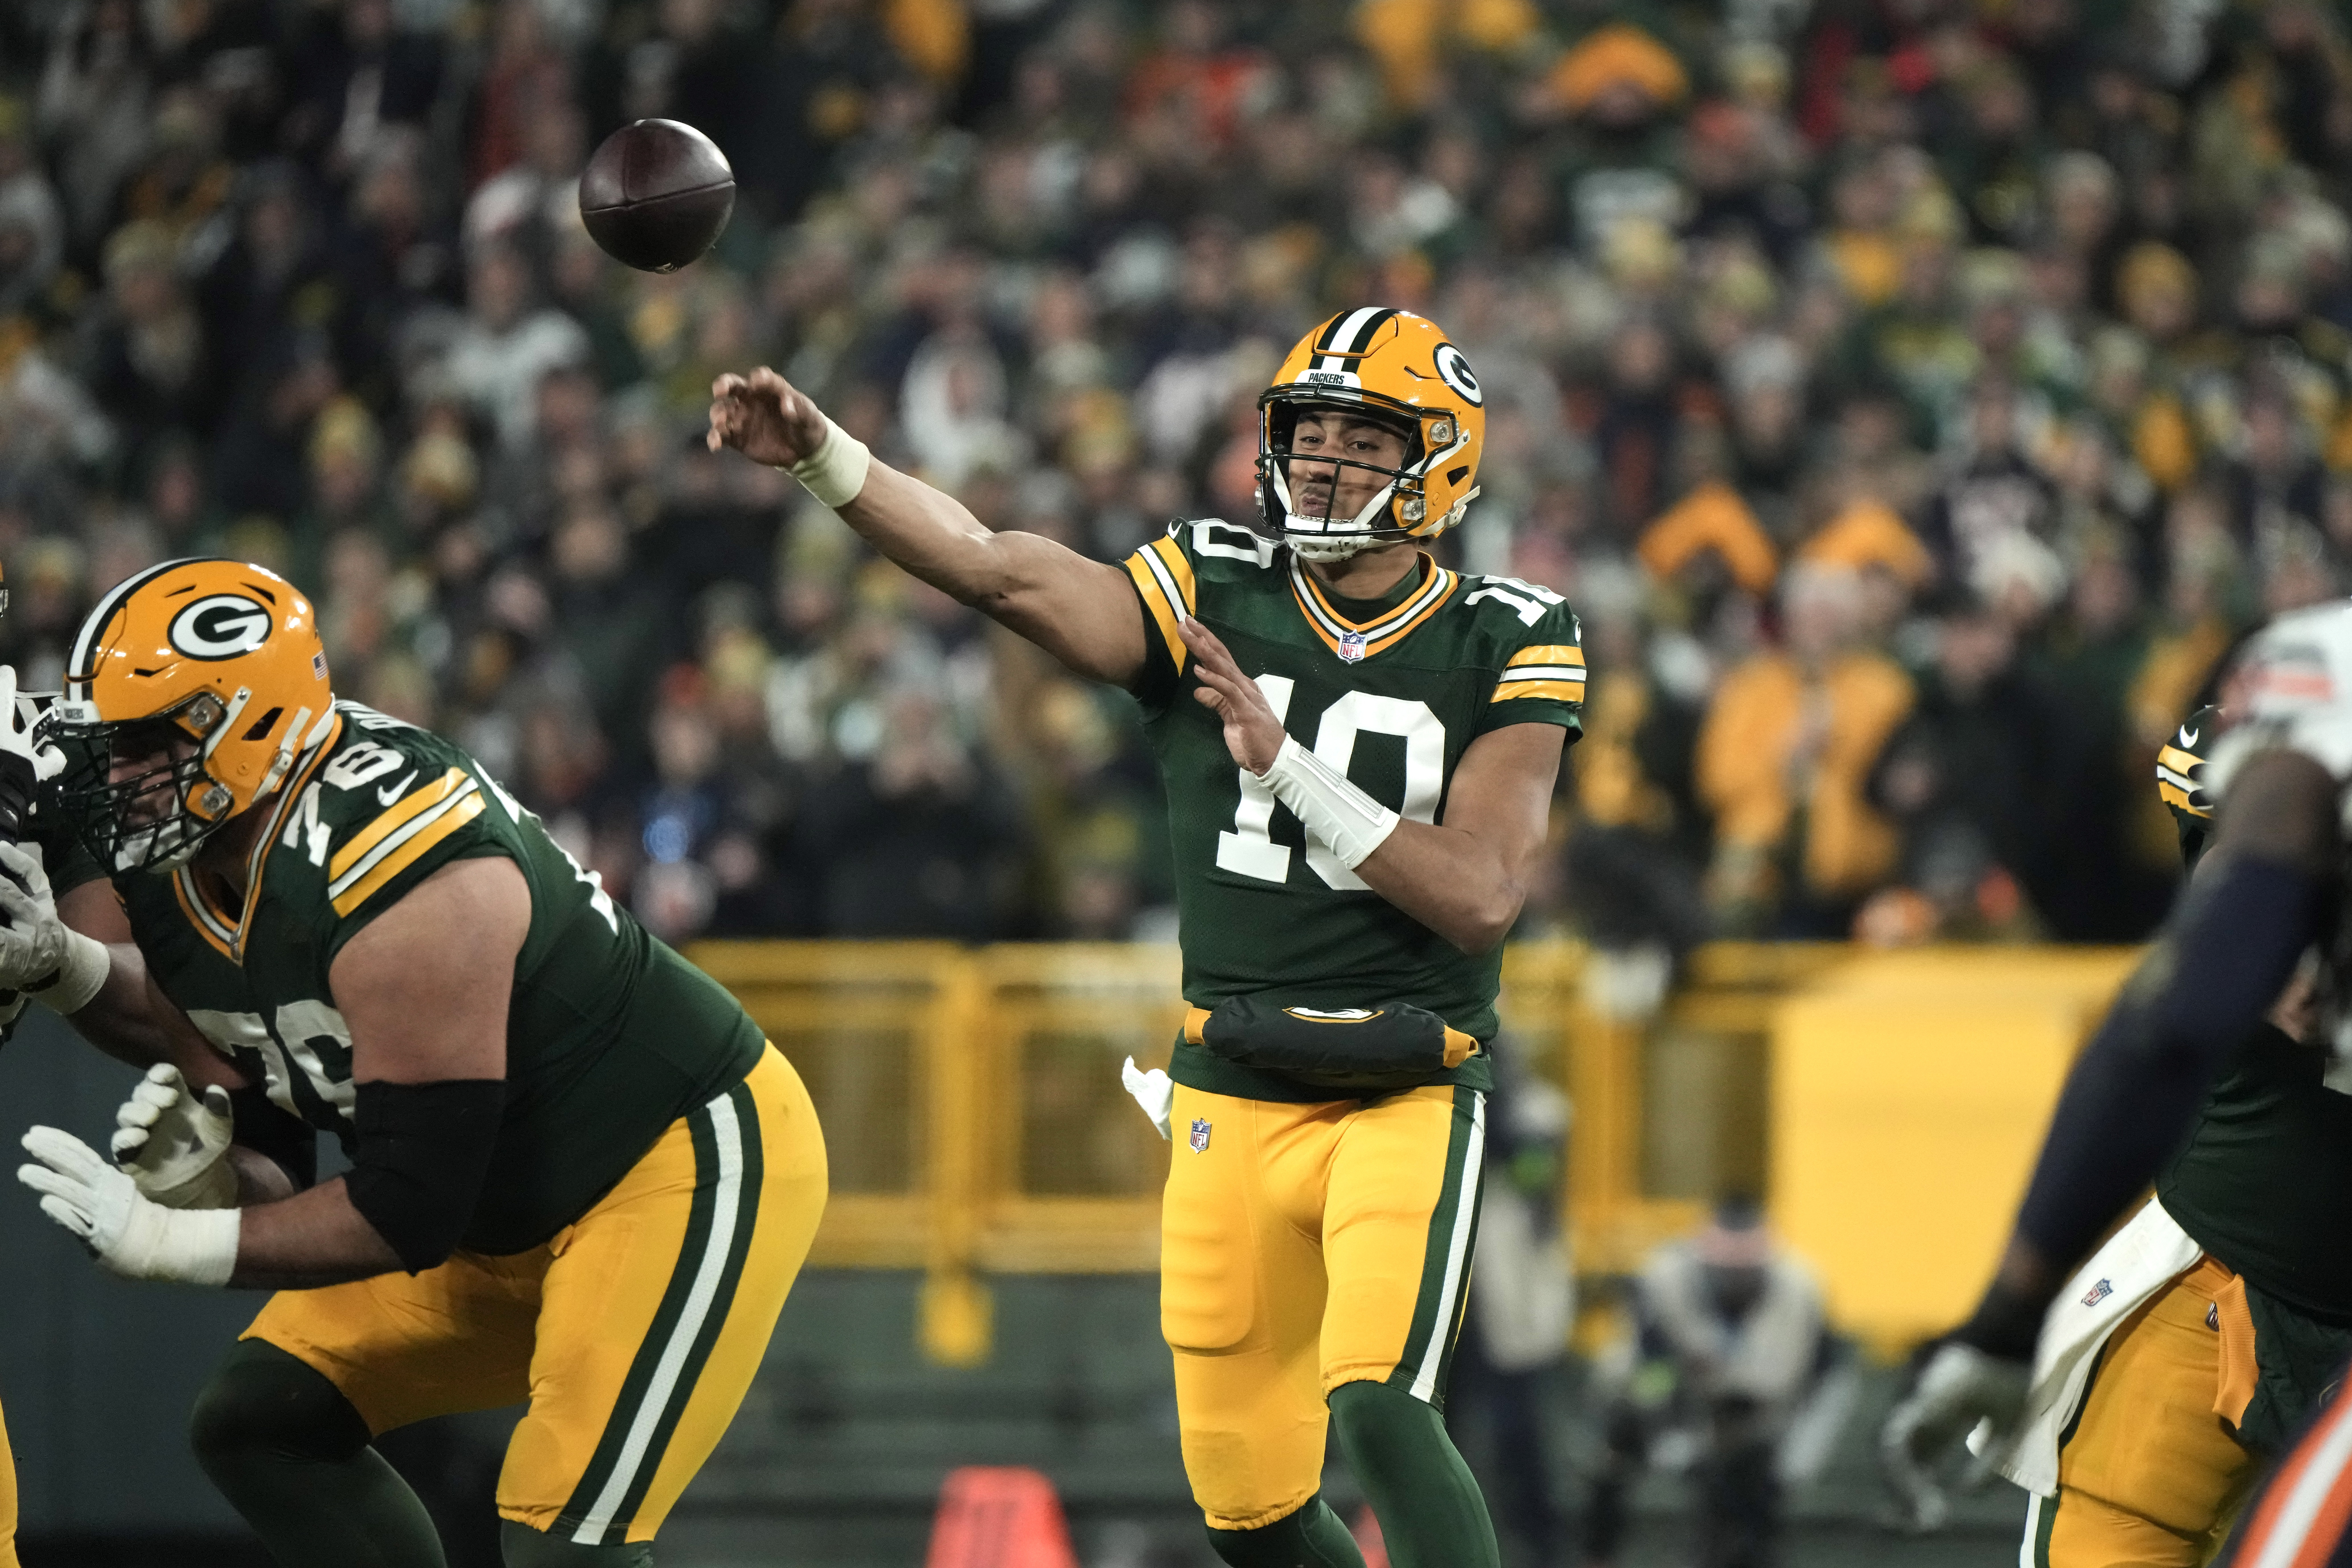 Packers beat Bears, clinch playoff berth